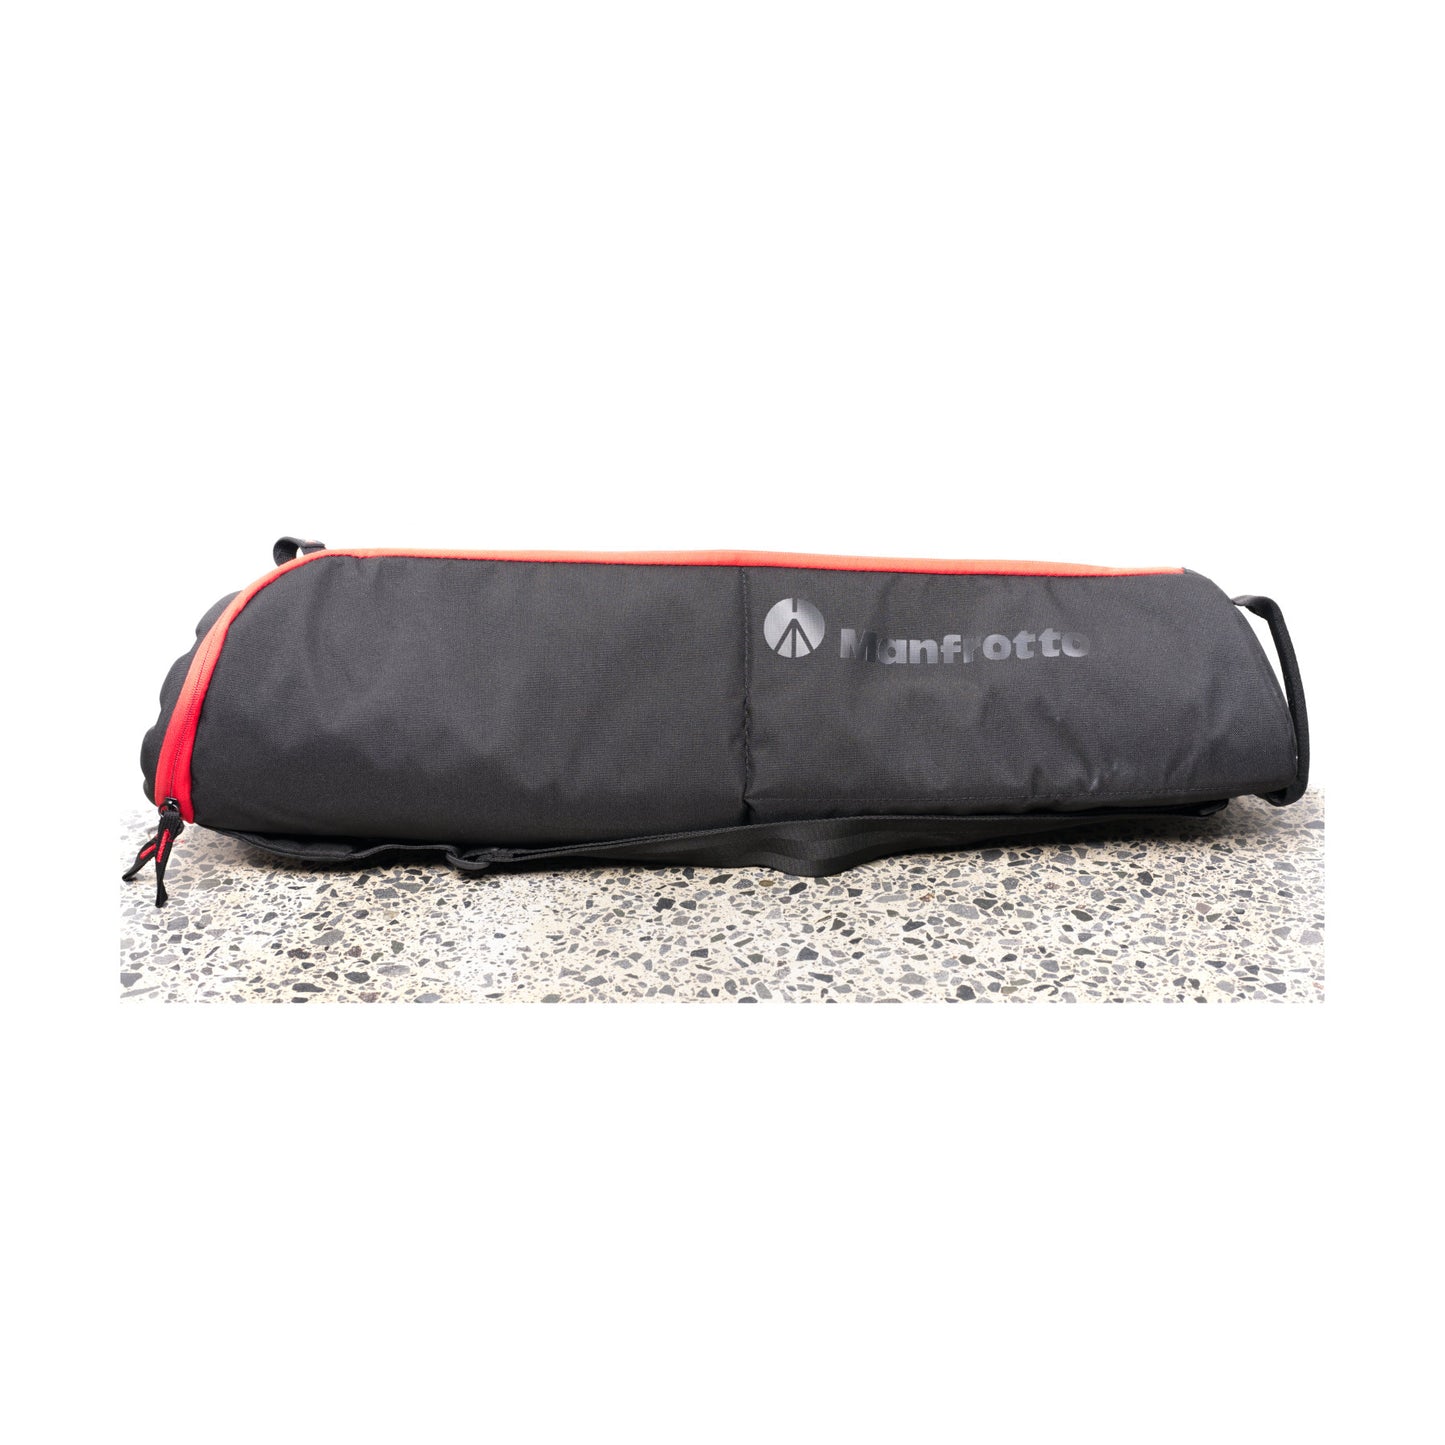 Buy second hand Manfrotto MBAG75PN Tripod Bag Padded 75cm at Topic Store